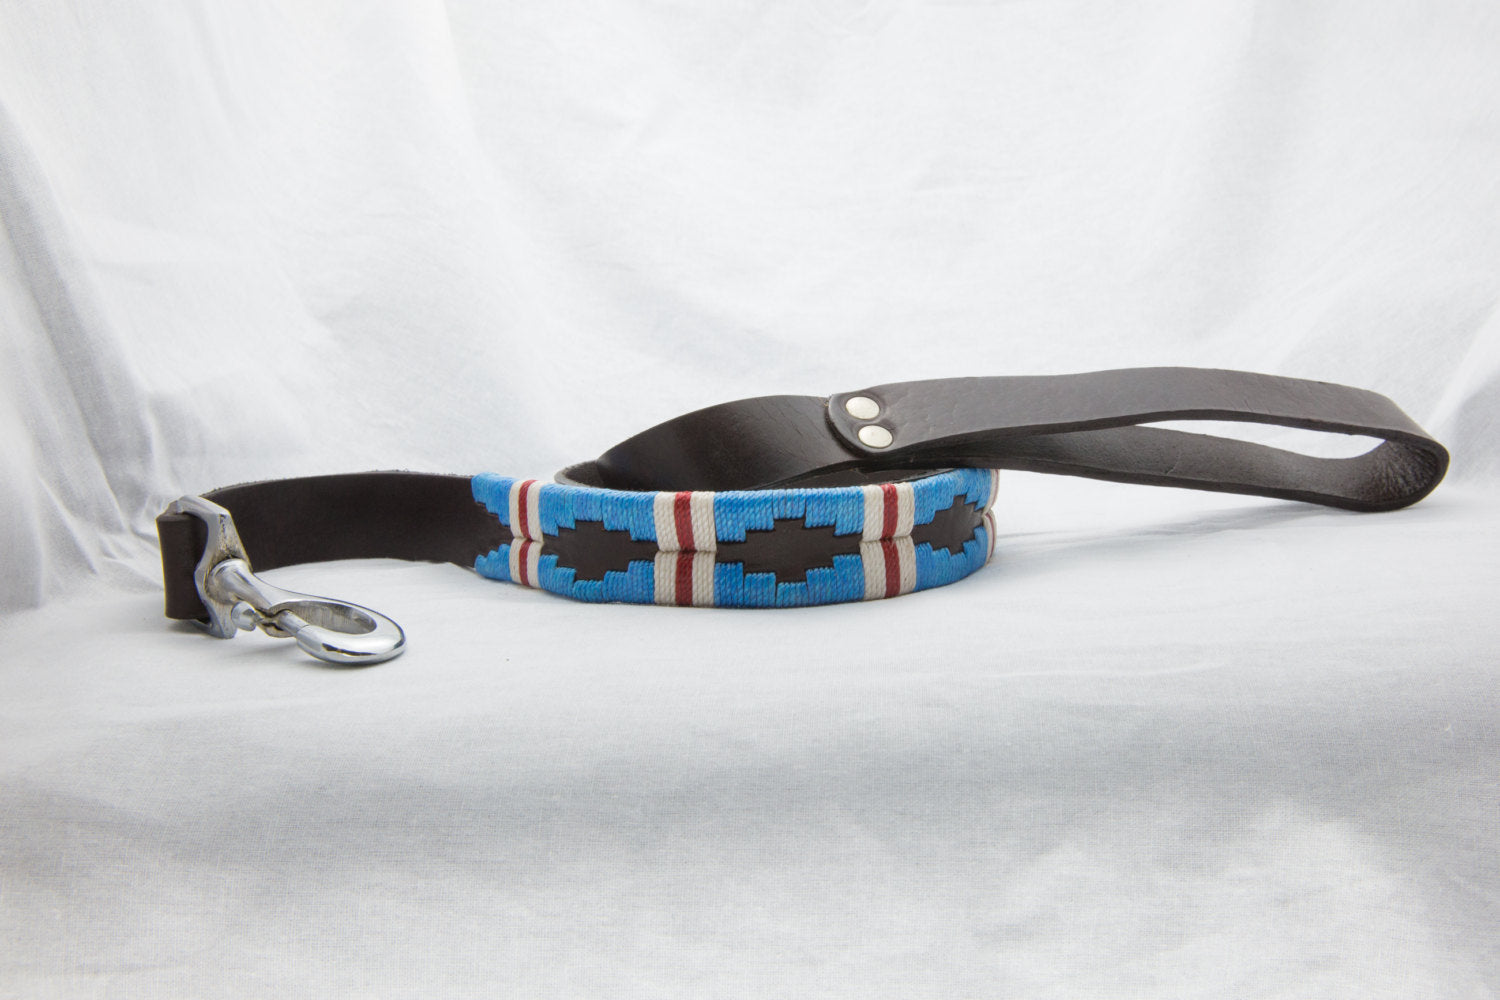 The Pacific Leather Dog Leash - hand-stitched with vibrantly colored wax threads in light blue with a white and red stripe